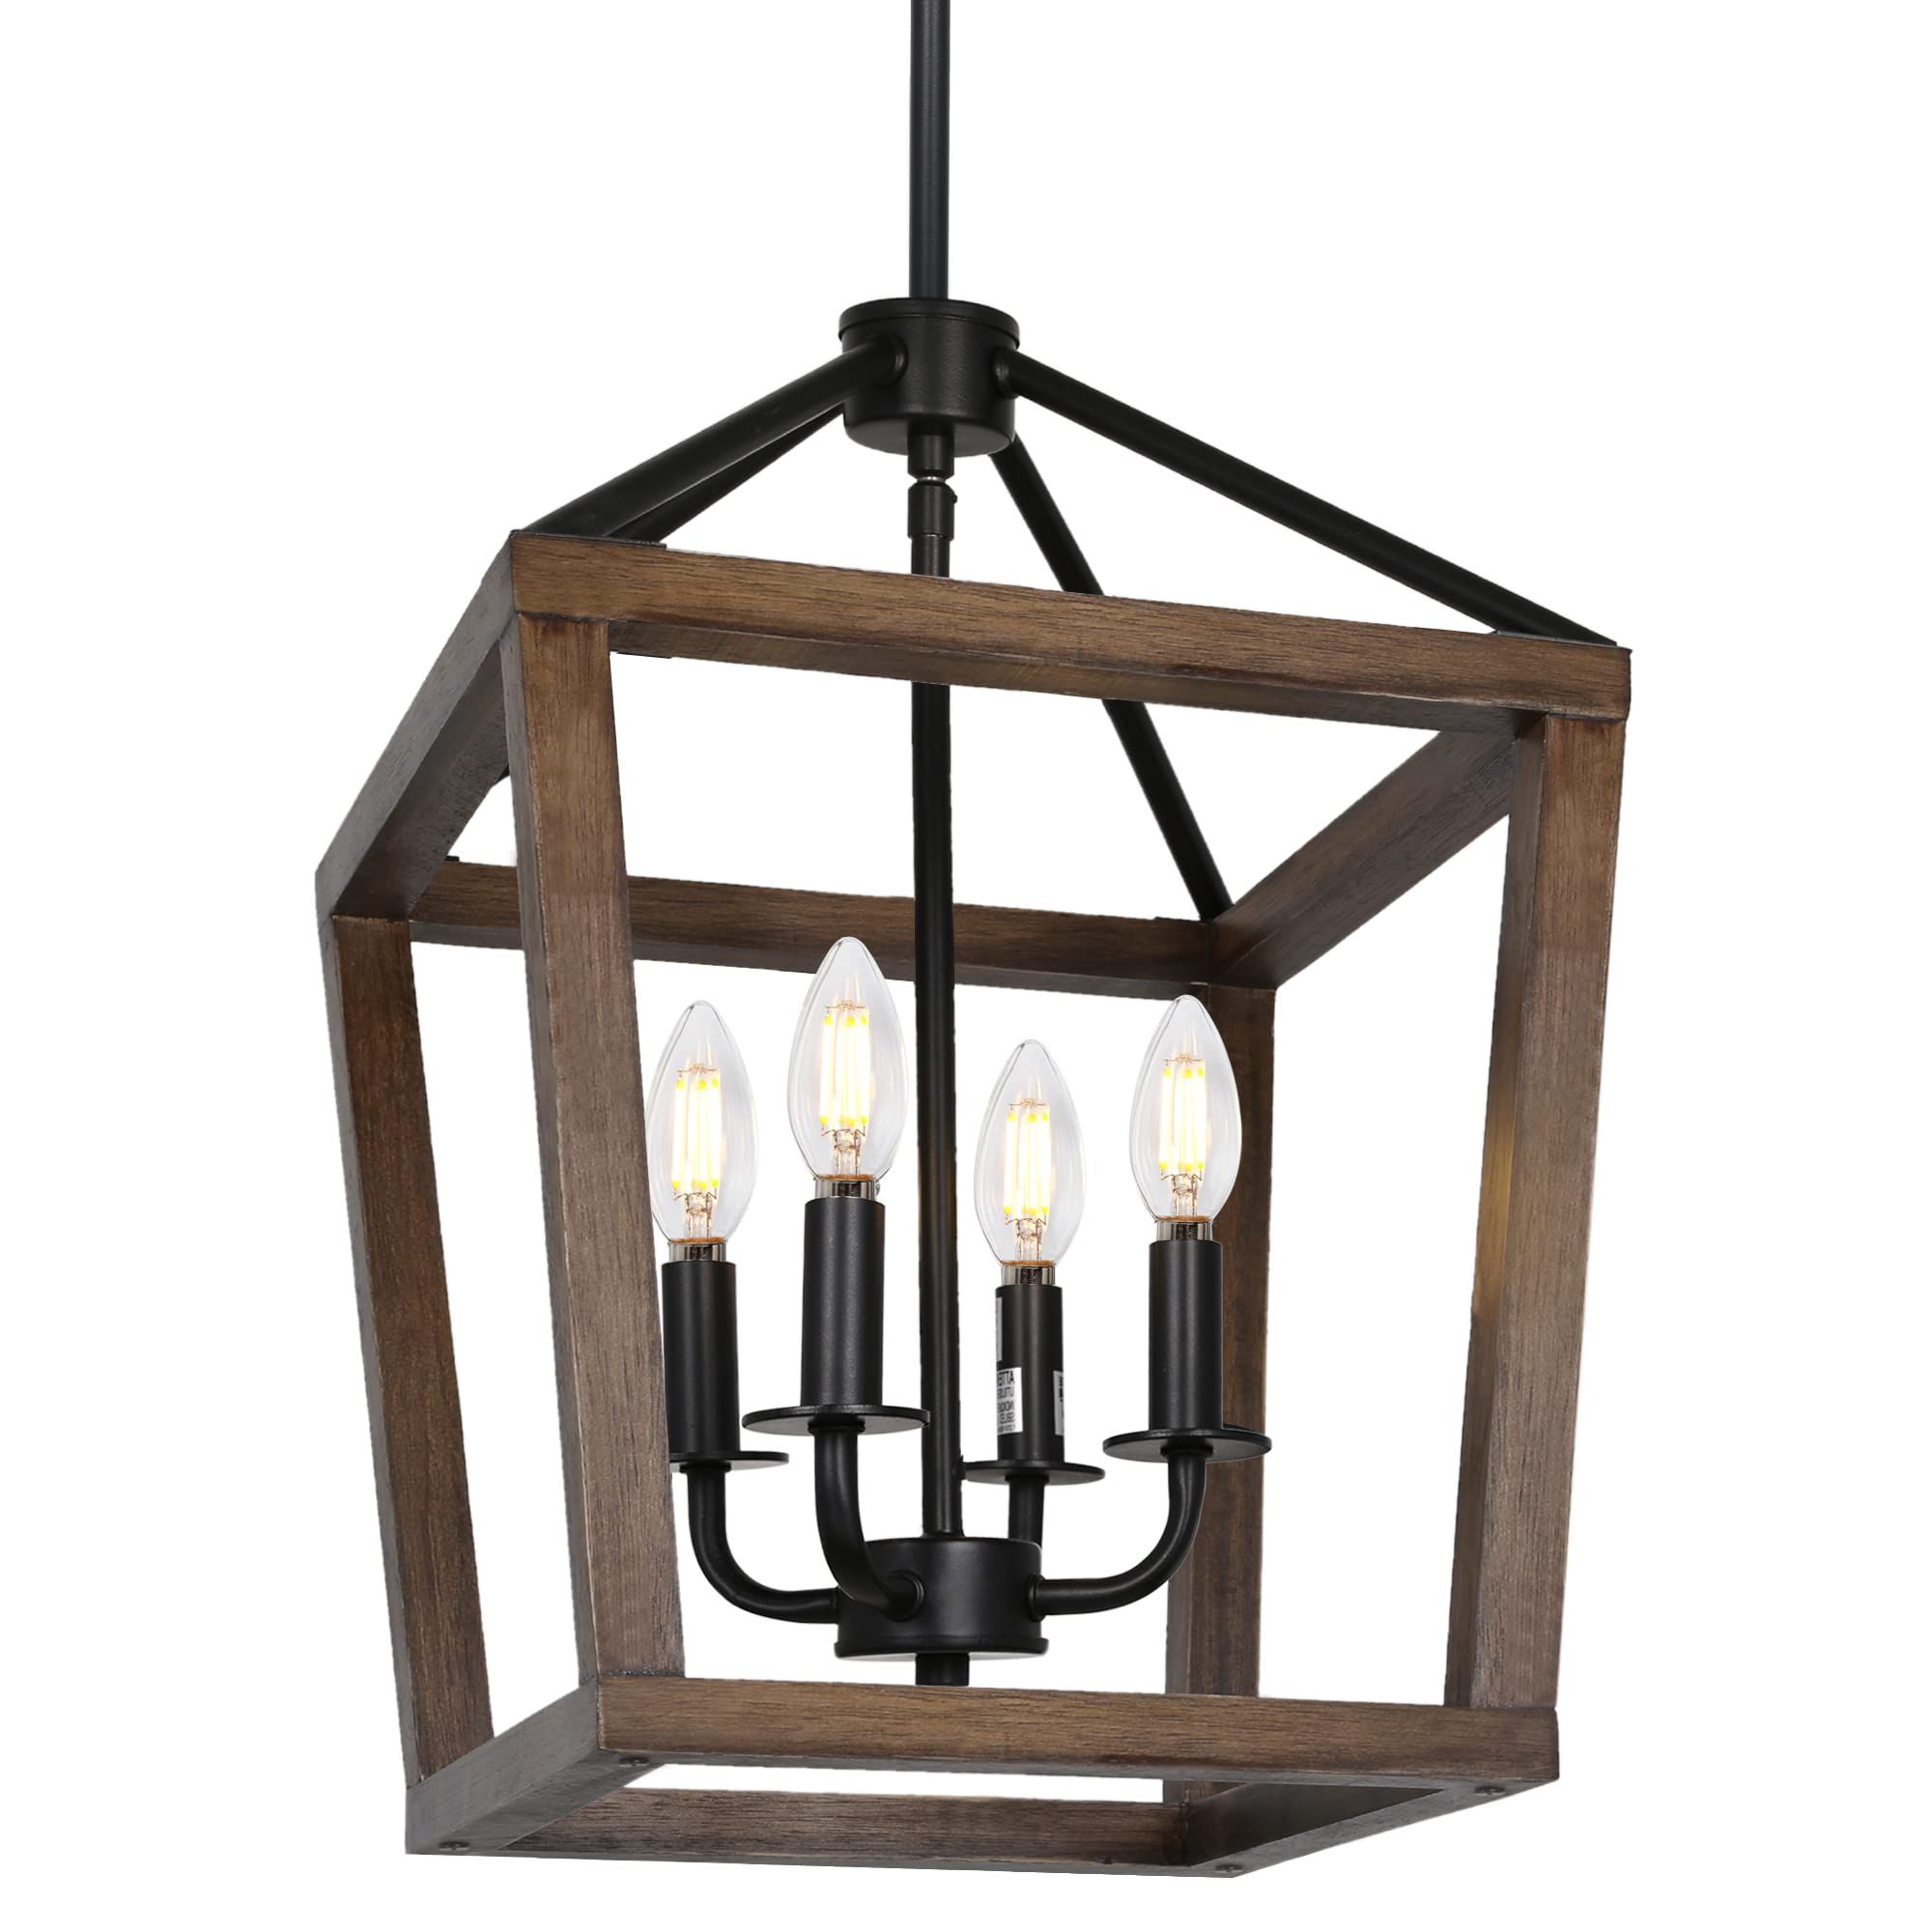 4 Light Rustic Chandelier, Classic Lantern Pendant Light With Oak Wood And  Iron Finish, Farmhouse Lighting Fixtures For Dining Room, Kitchen, Hallway  – – Amazon Pertaining To Popular Distressed Oak Lantern Chandeliers (View 1 of 15)